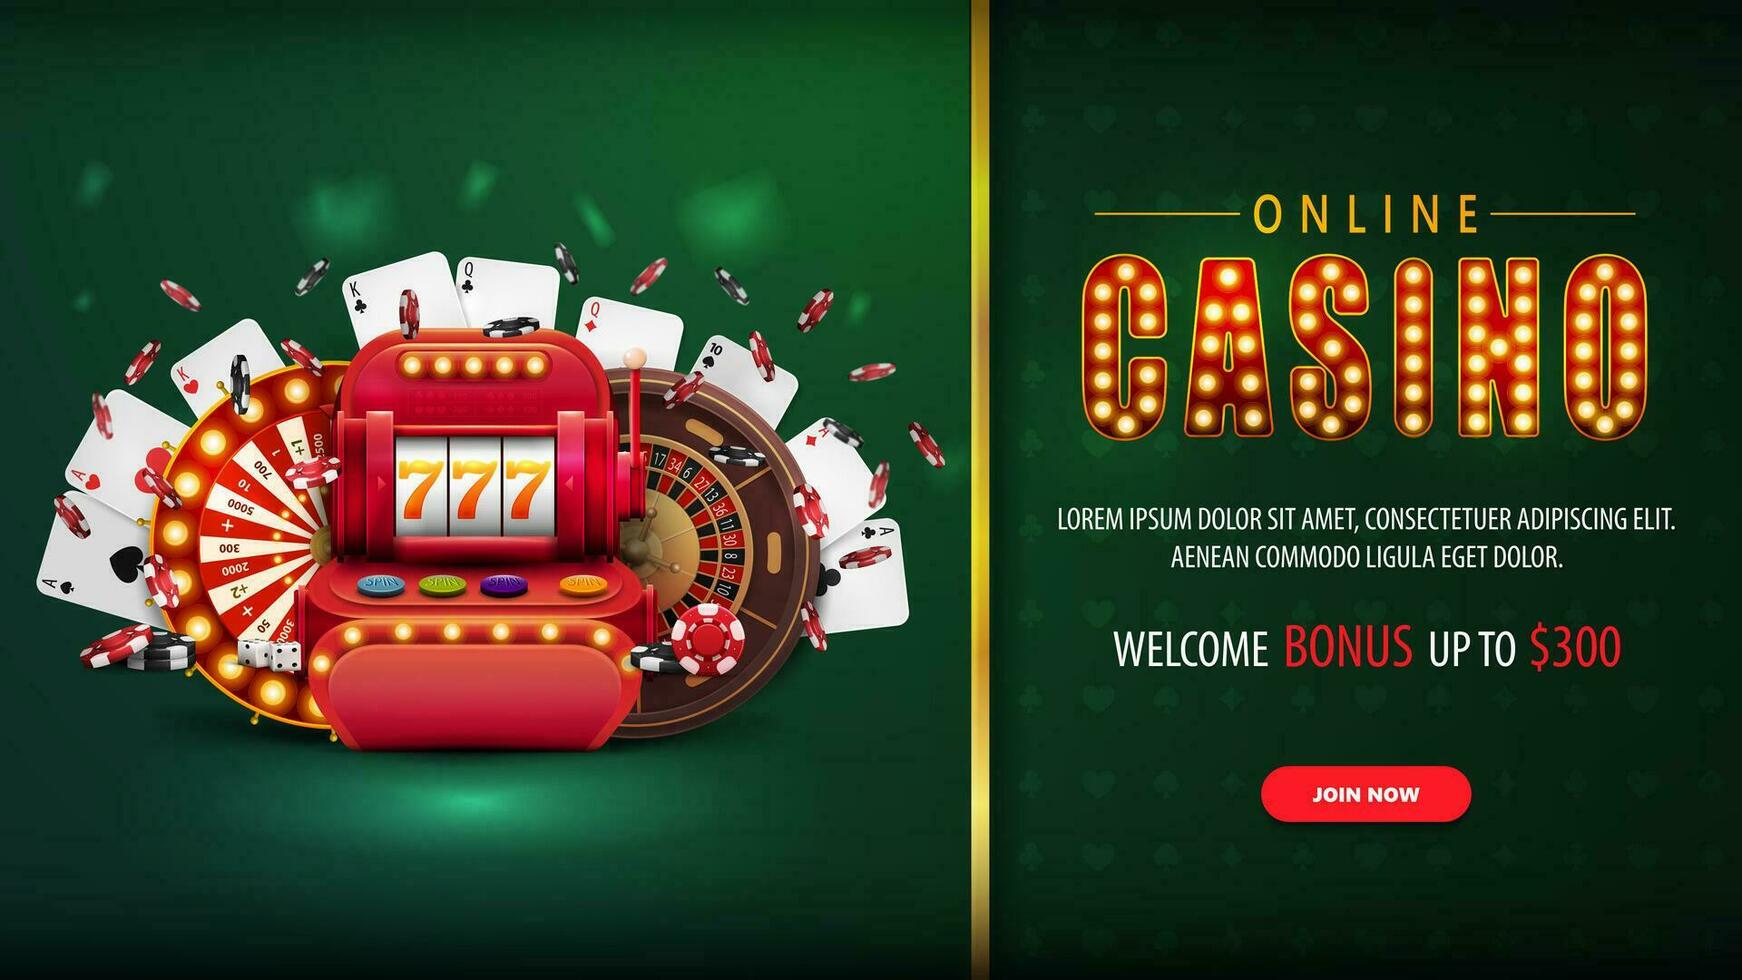 Online casino, green horizontal banner with button, offer, slot machine, Casino Wheel Fortune, Roulette, falling poker chips and playing cards. vector